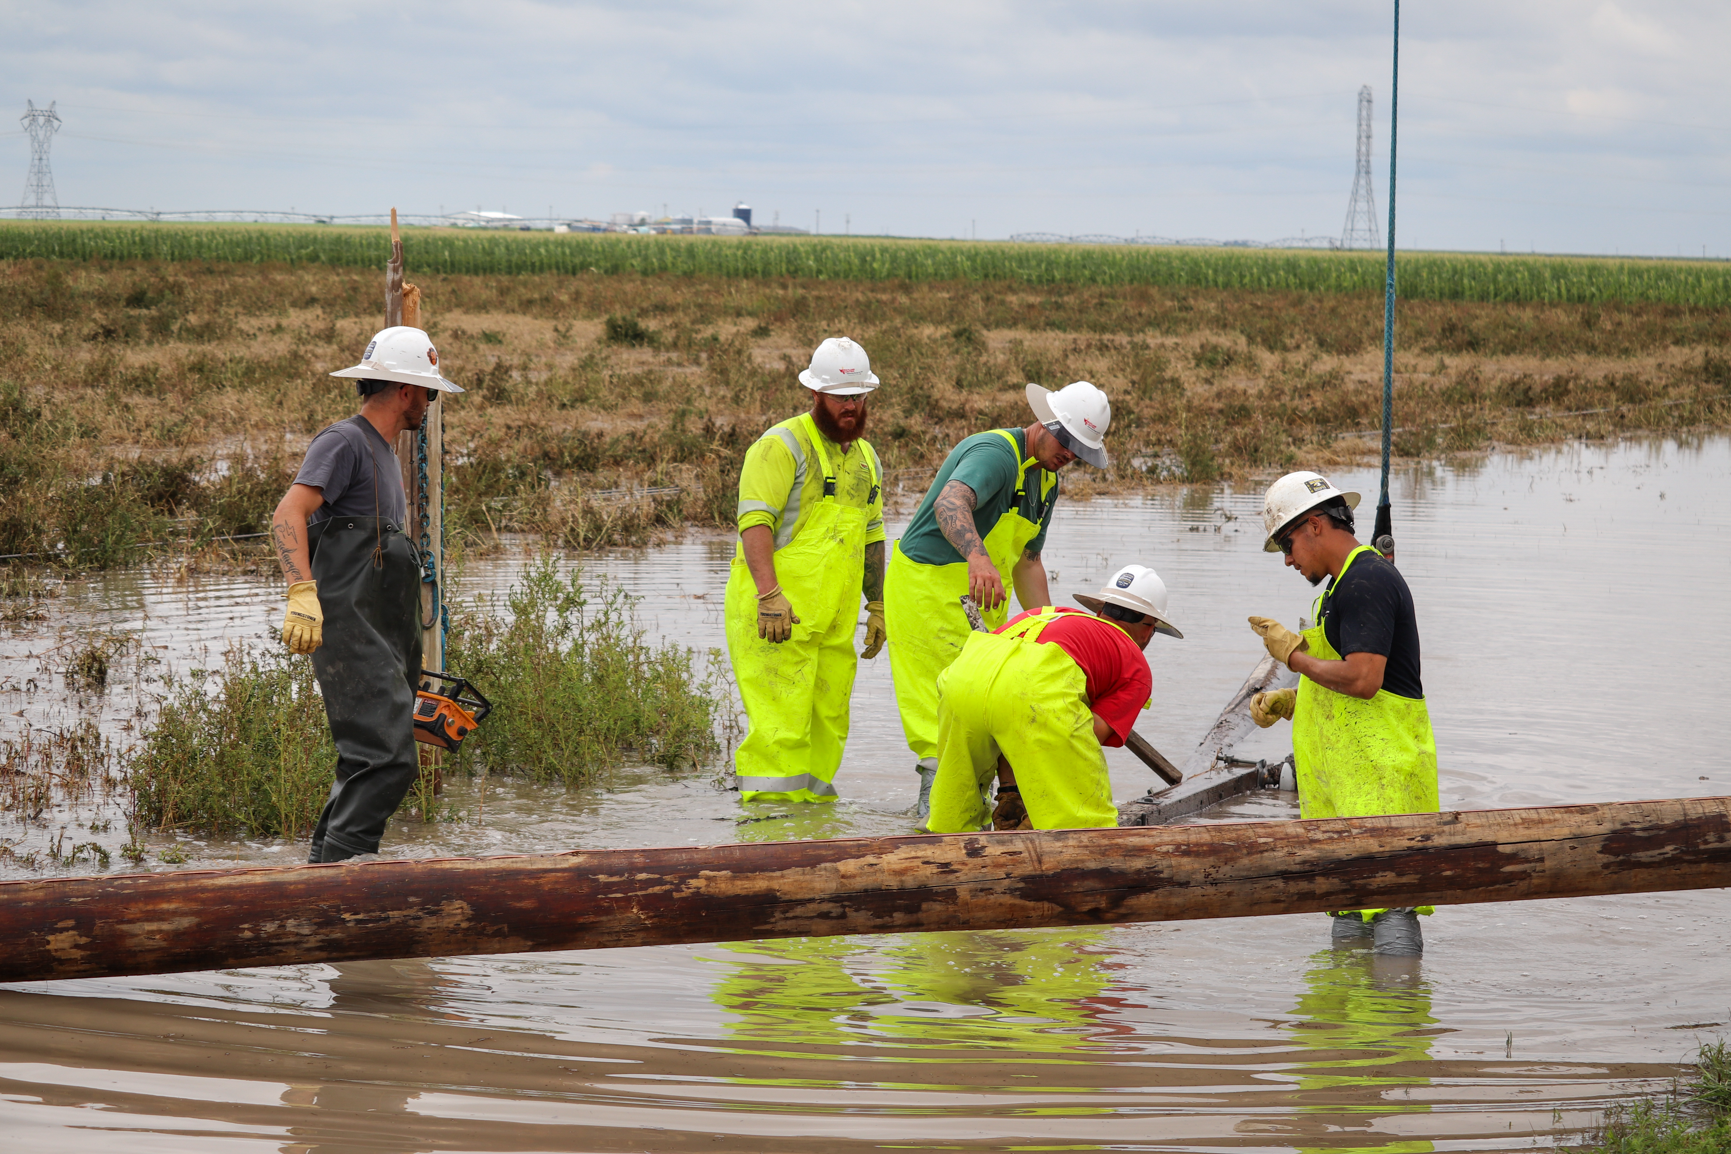 Line crew members work on July 23, 2023, to replace damaged poles in ditches full of rain water following severe storms in Finney County. Pictured from left are Colby Gugelmeyer, apprentice lineman; Dillon Williams, apprentice lineman; Parker Fleming, journeyman lineman; Justin Skelton, line foreman; and Javier Marquez, apprentice lineman.